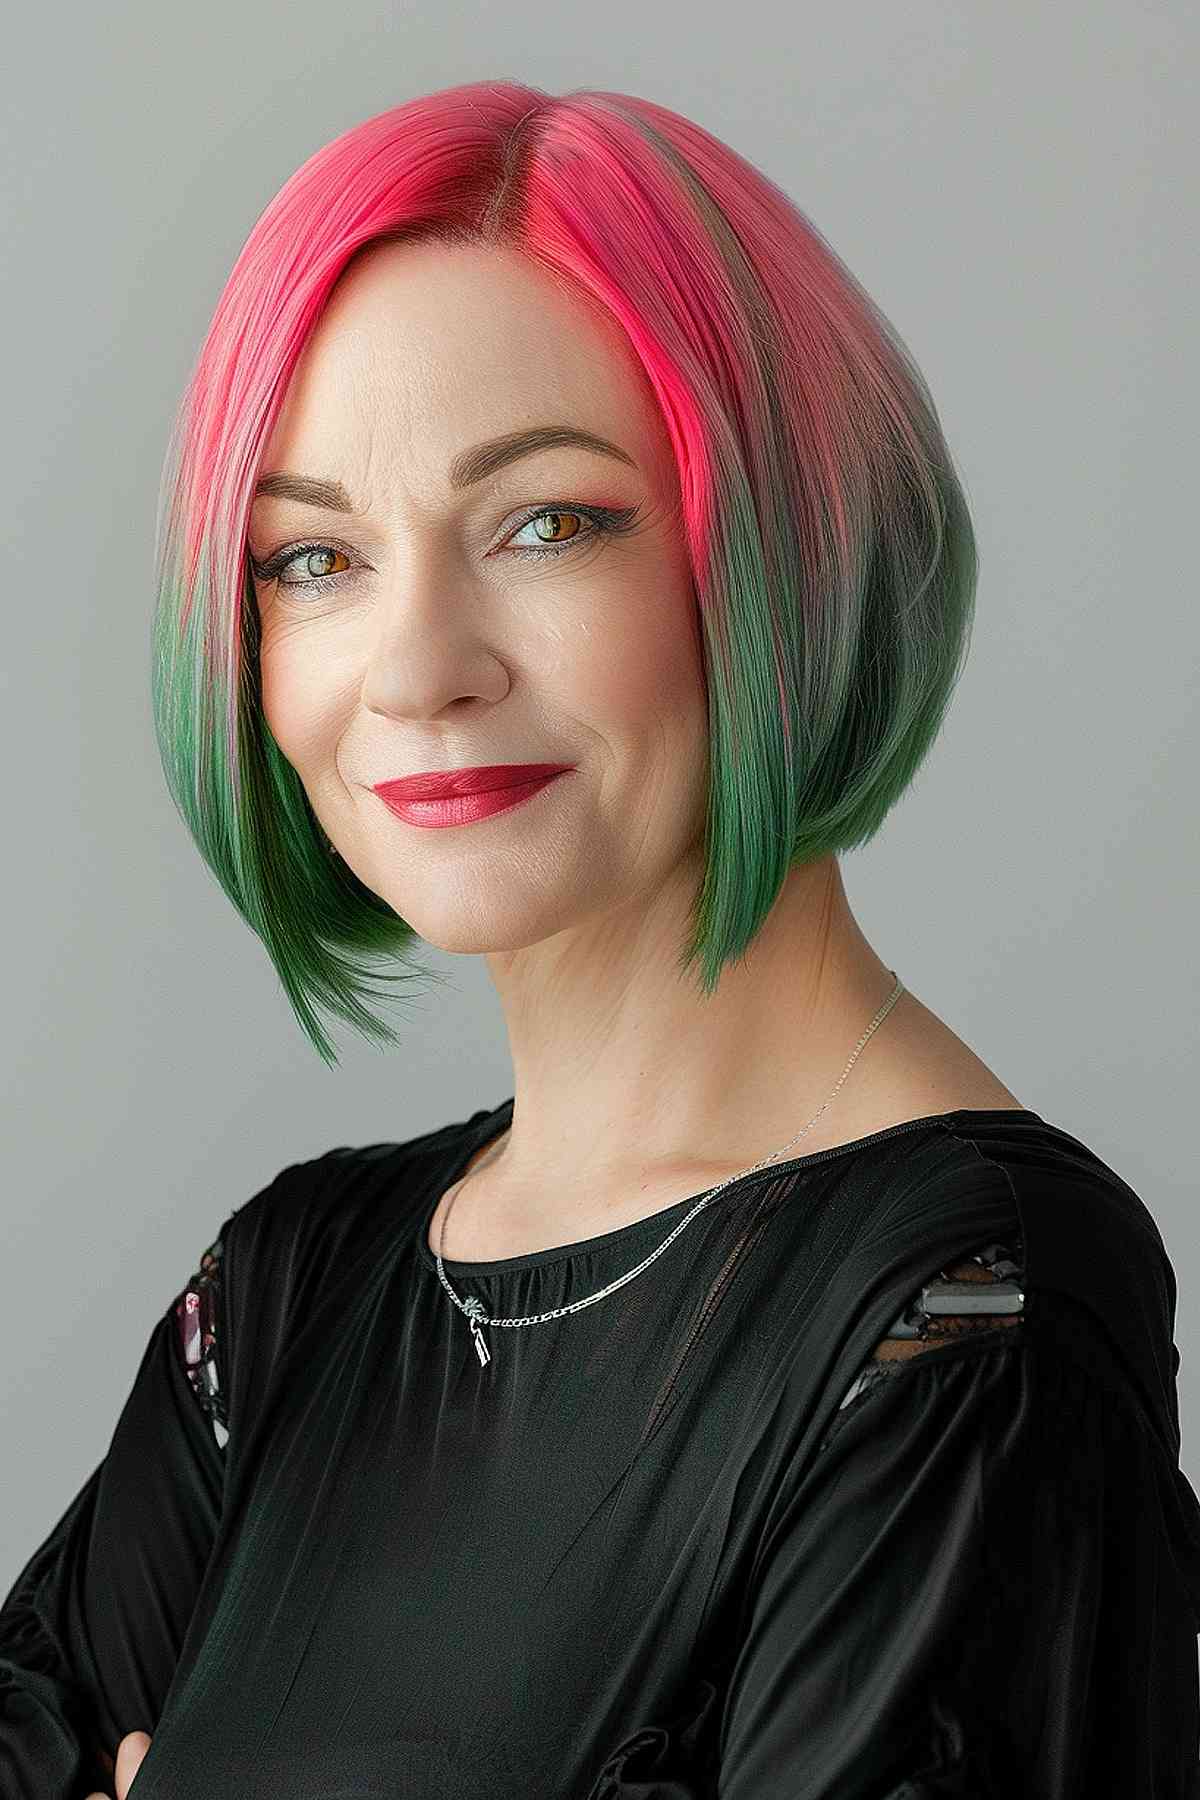 A woman over 40 with a stylish bob haircut featuring a gradient from bright pink to green, portraying an elegant yet bold look.